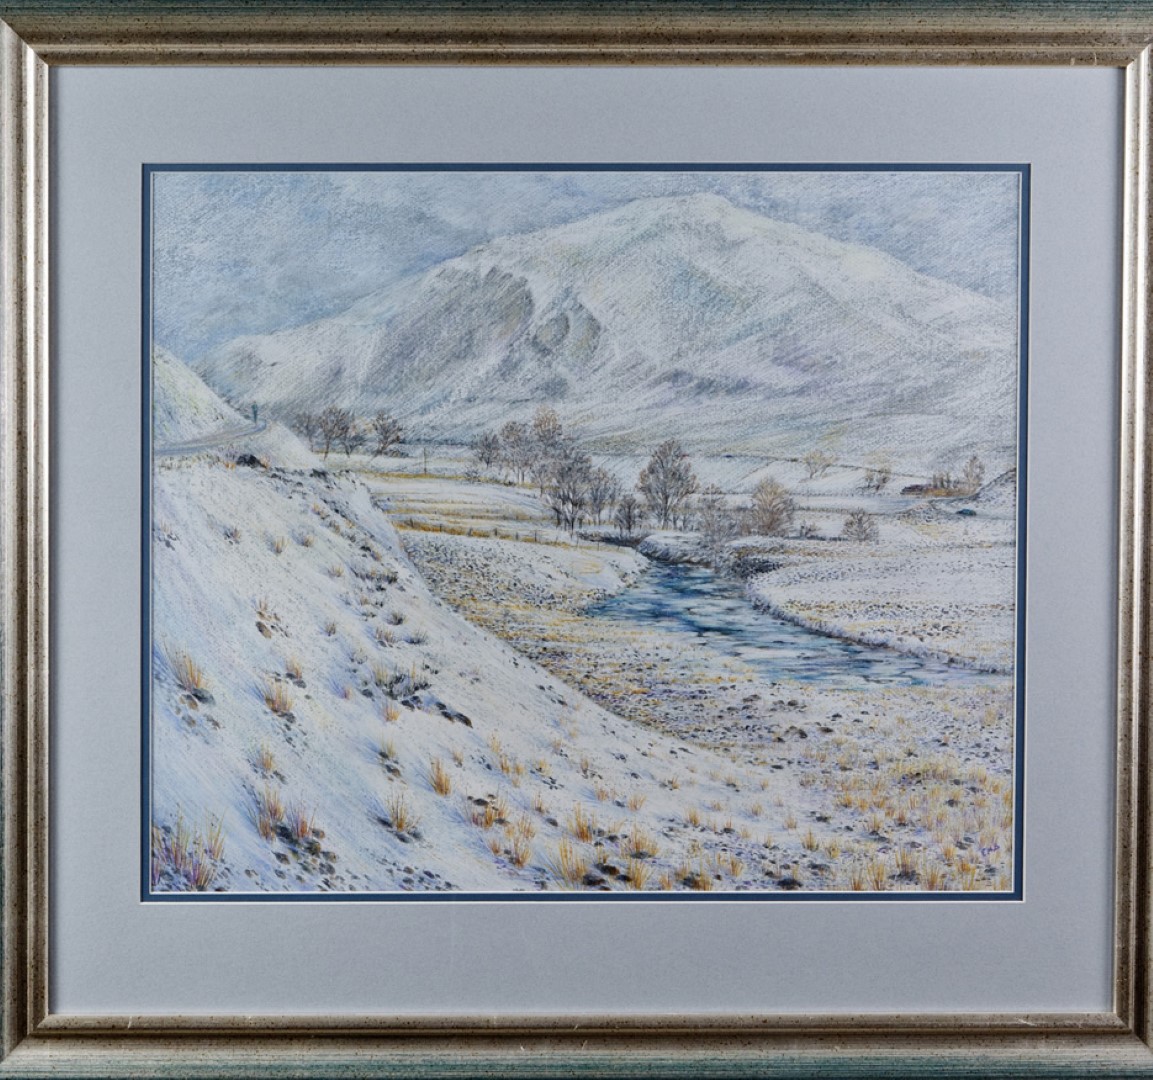 Winter Day near Braemar (Highlands, Scotland) – Pastel – 2 ft 6 inches x 2 ft 3 inches, framed